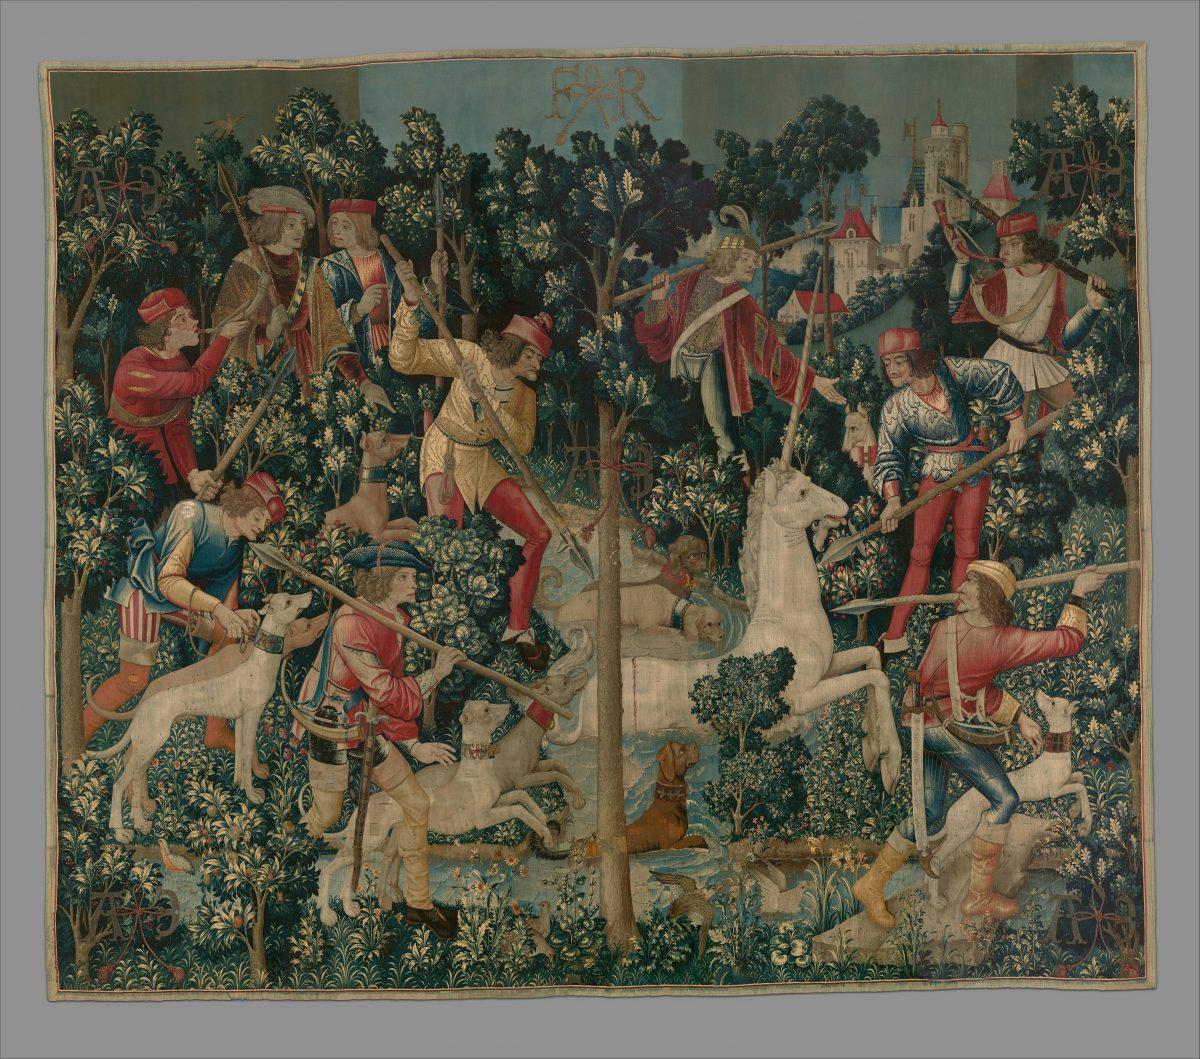 “The Unicorn Is Attacked,” 1495–1505, South Netherlandish. Wool warp with wool, silk, silver, and gilt wefts; 145 inches by 168 inches. Gift of John D. Rockefeller Jr., 1937, The Met Cloisters. (The Metropolitan Museum of Art )